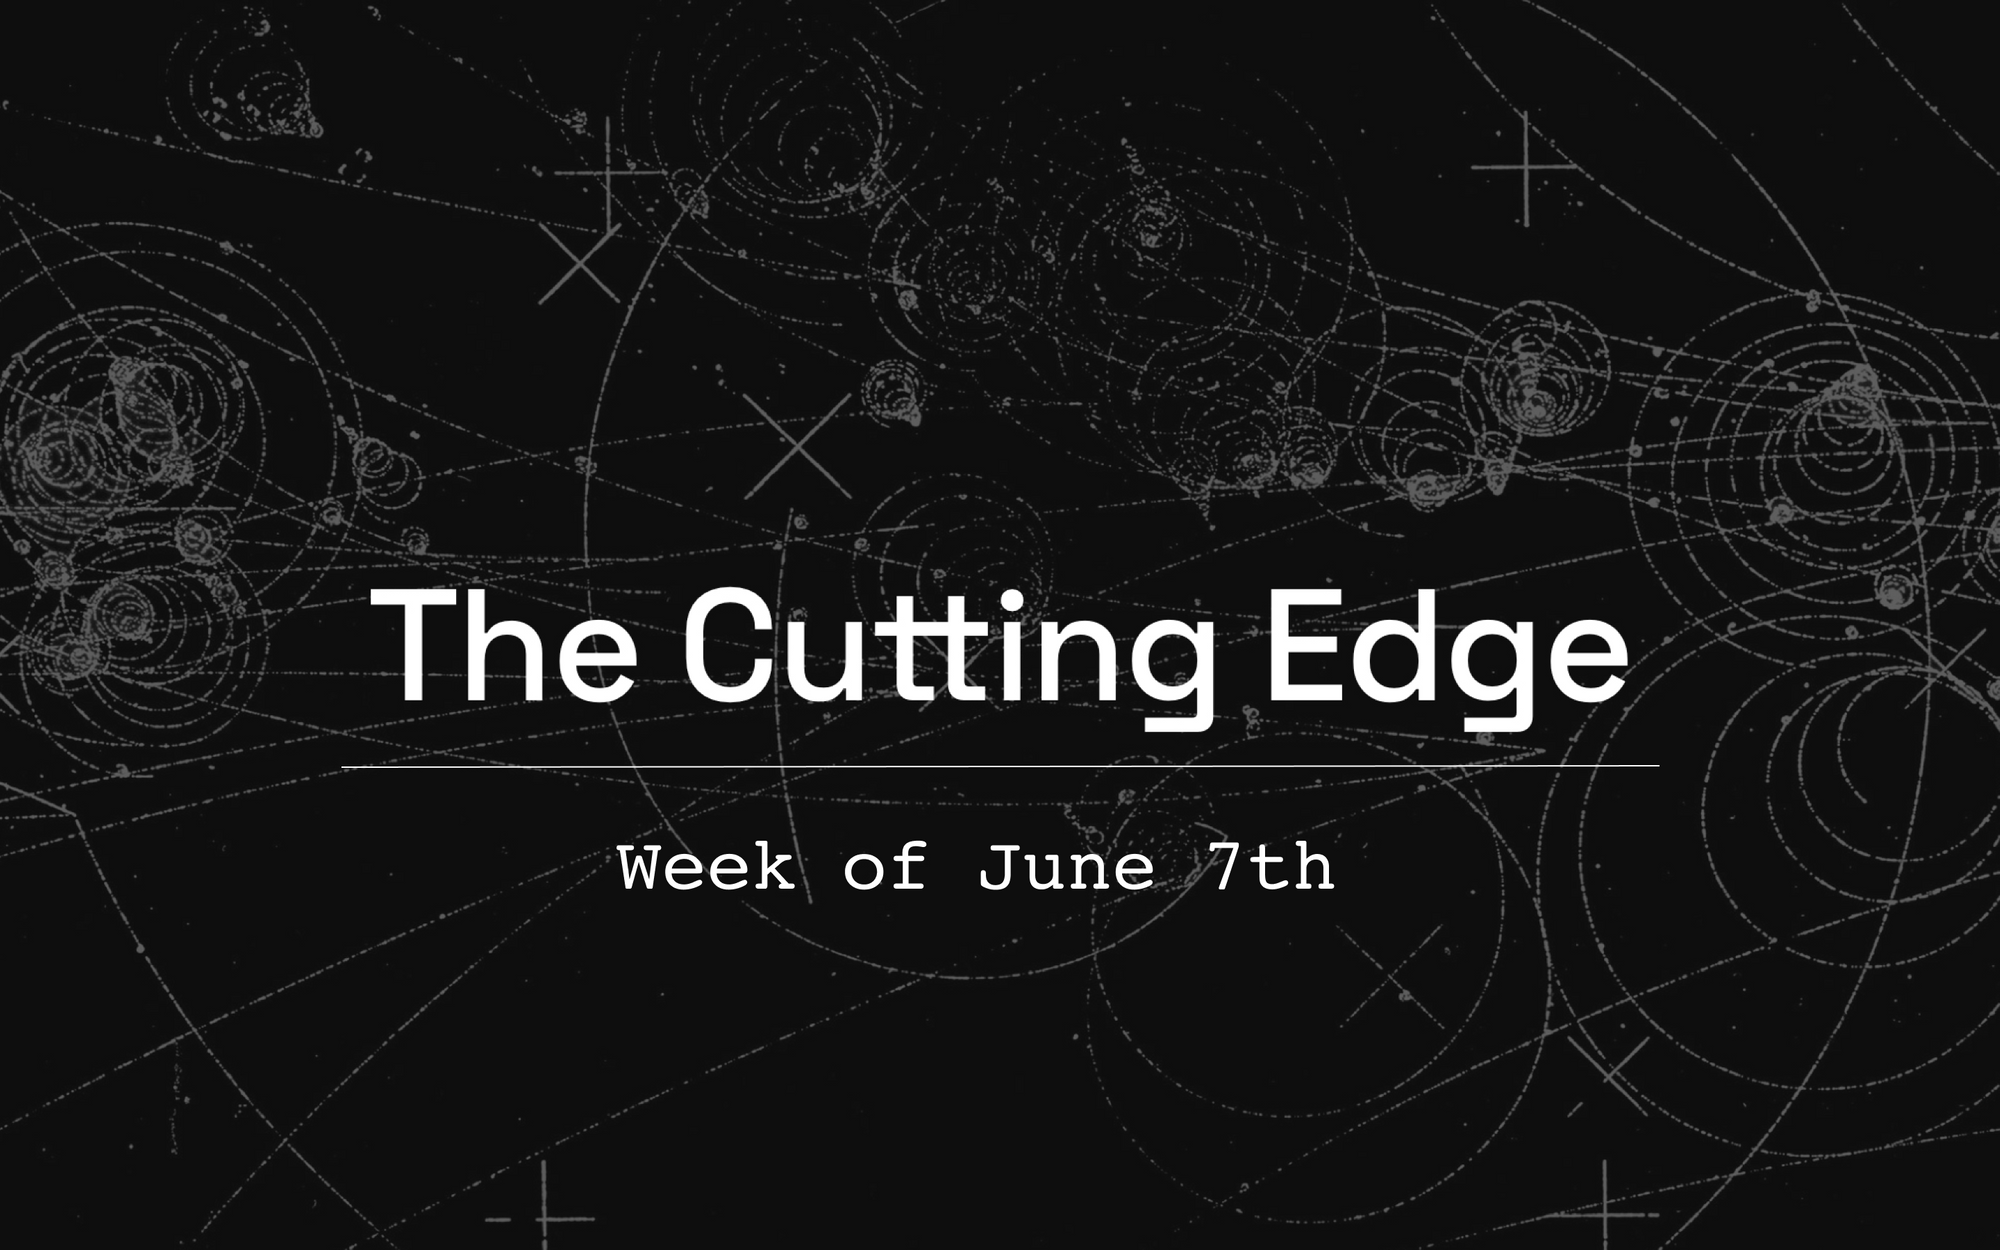 The Cutting Edge: Week of June 7th